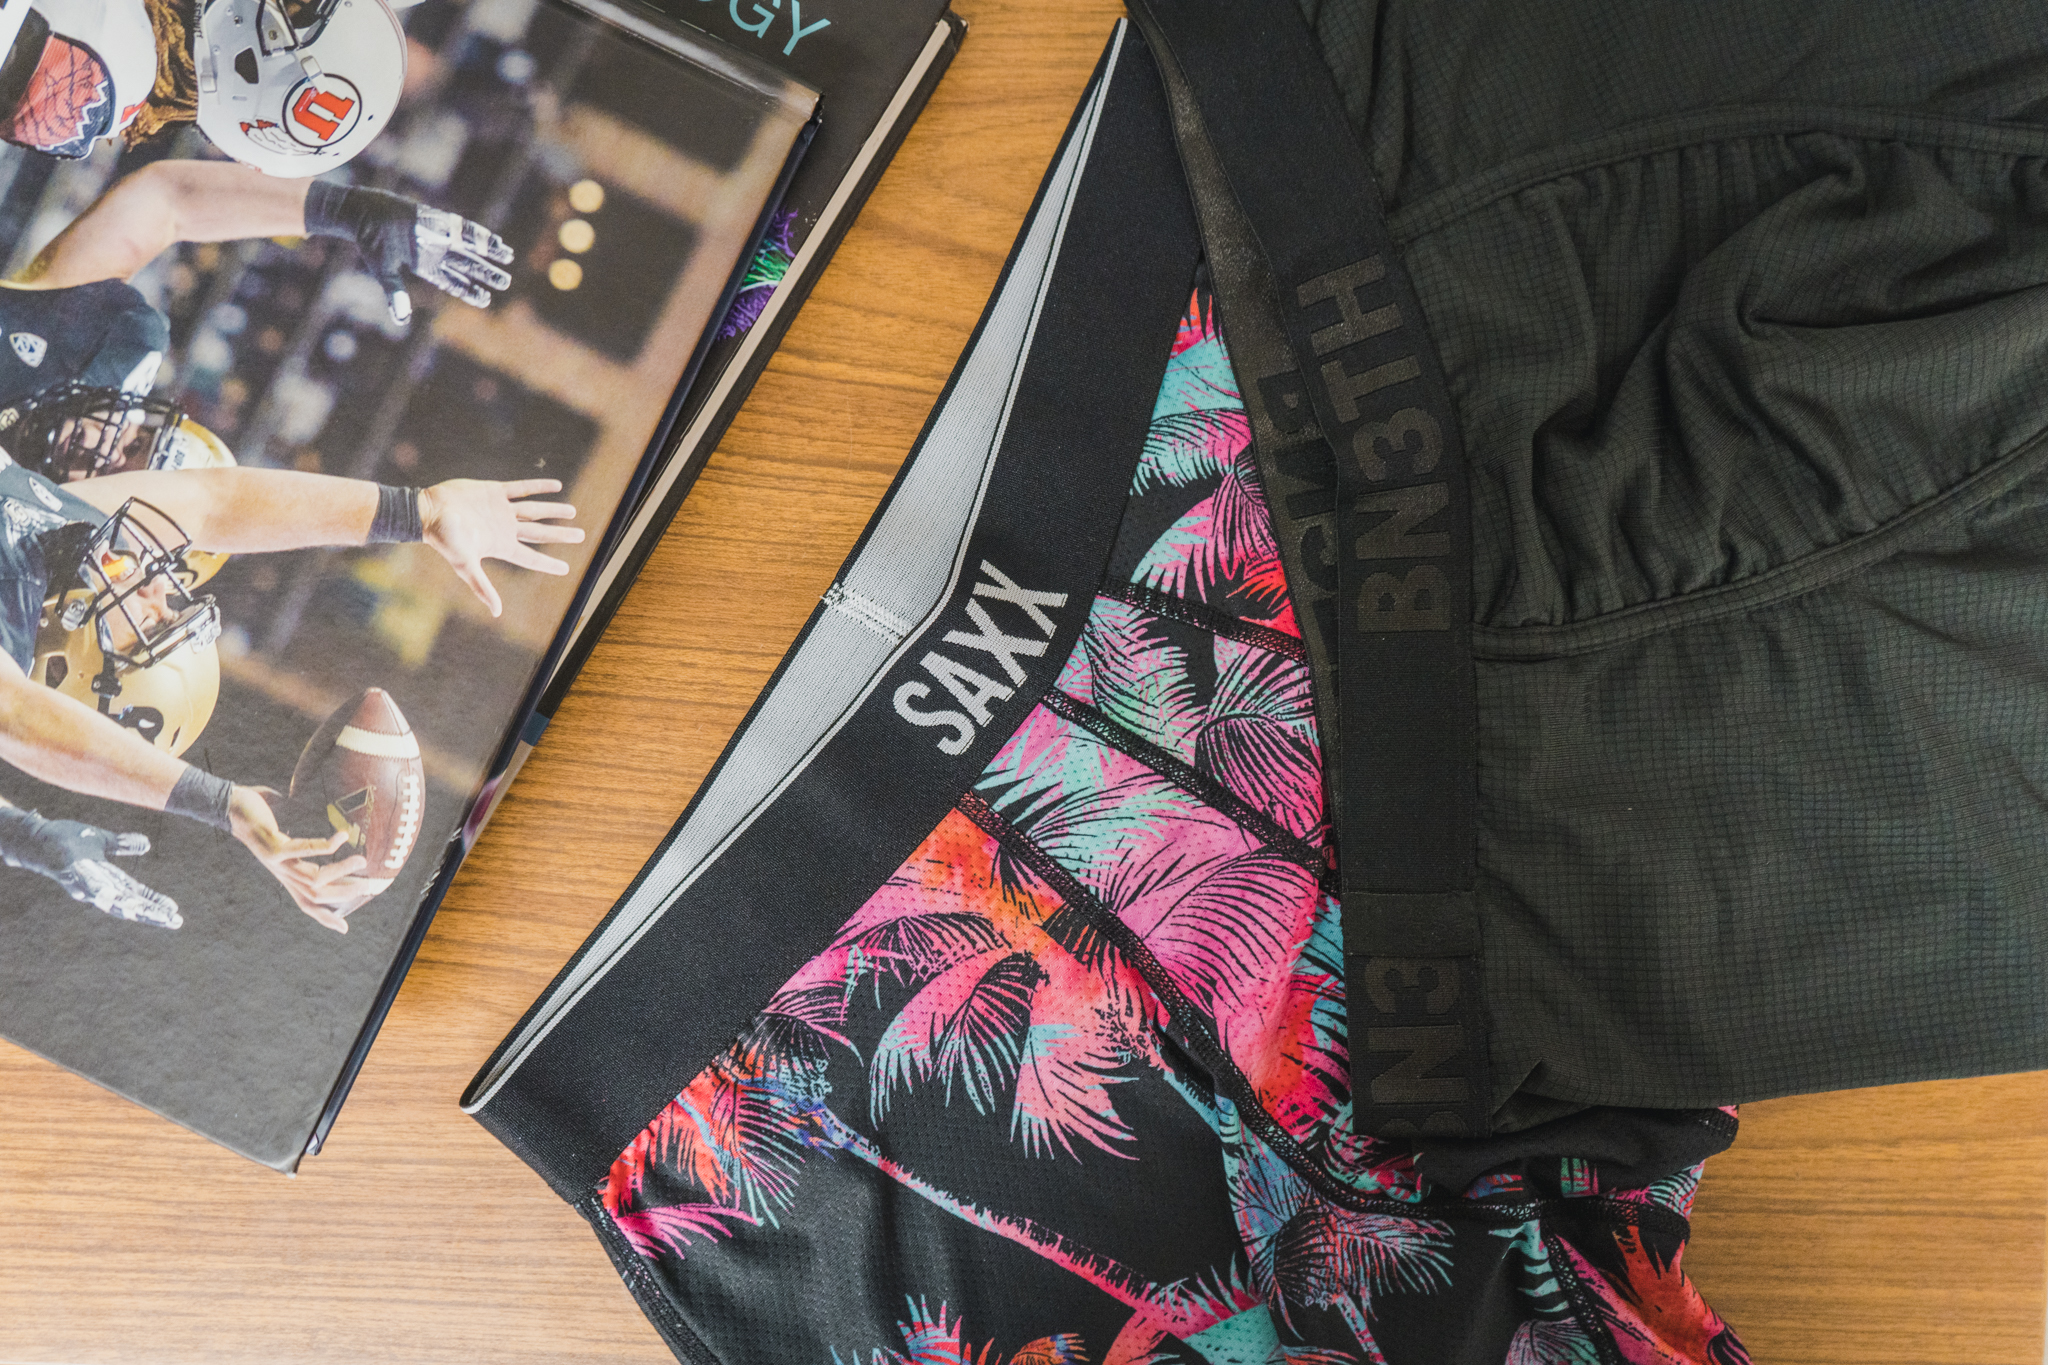 Saxx Underwear review: Are the boxer briefs comfortable? - Reviewed